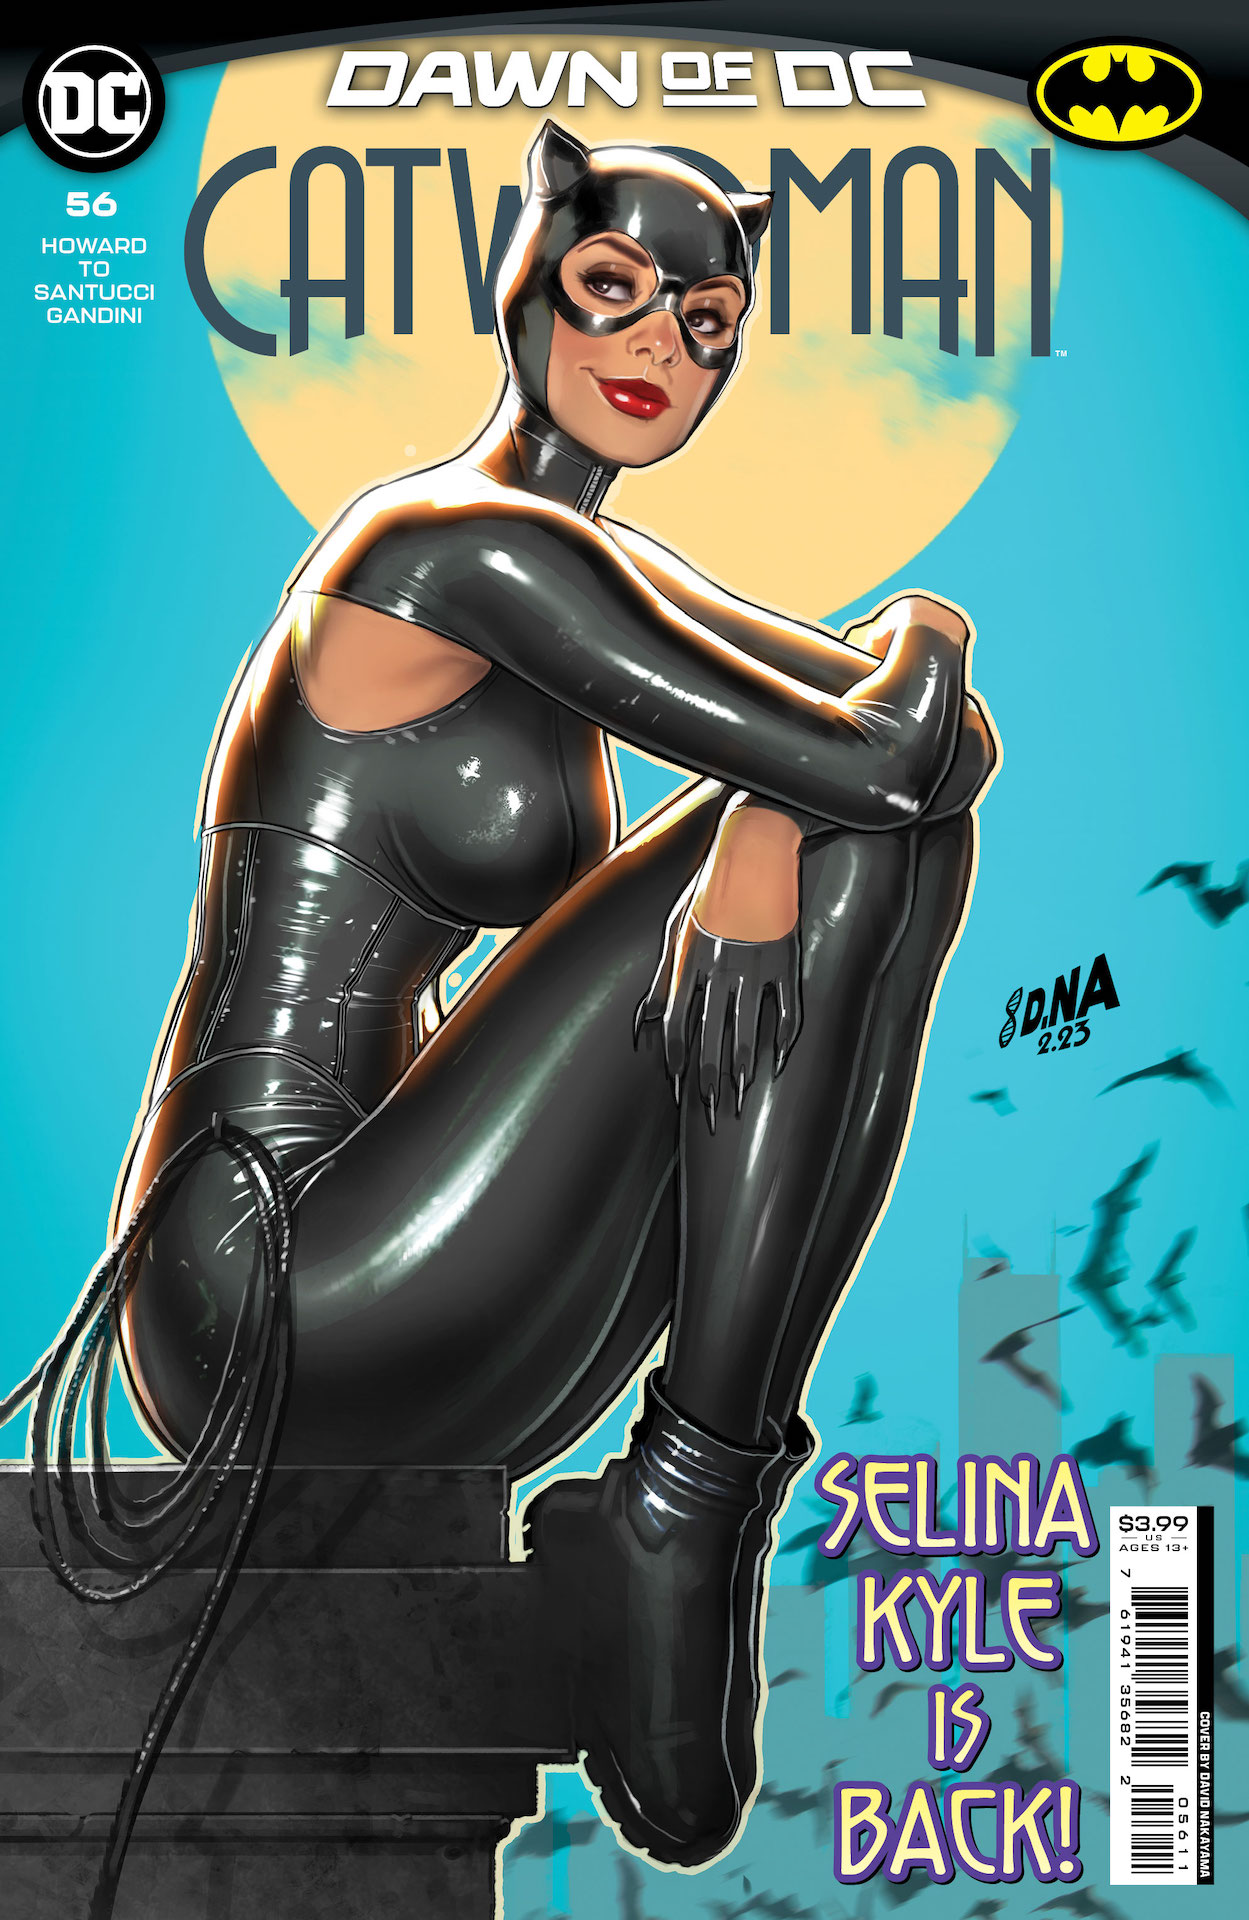 DC Preview: Catwoman #56